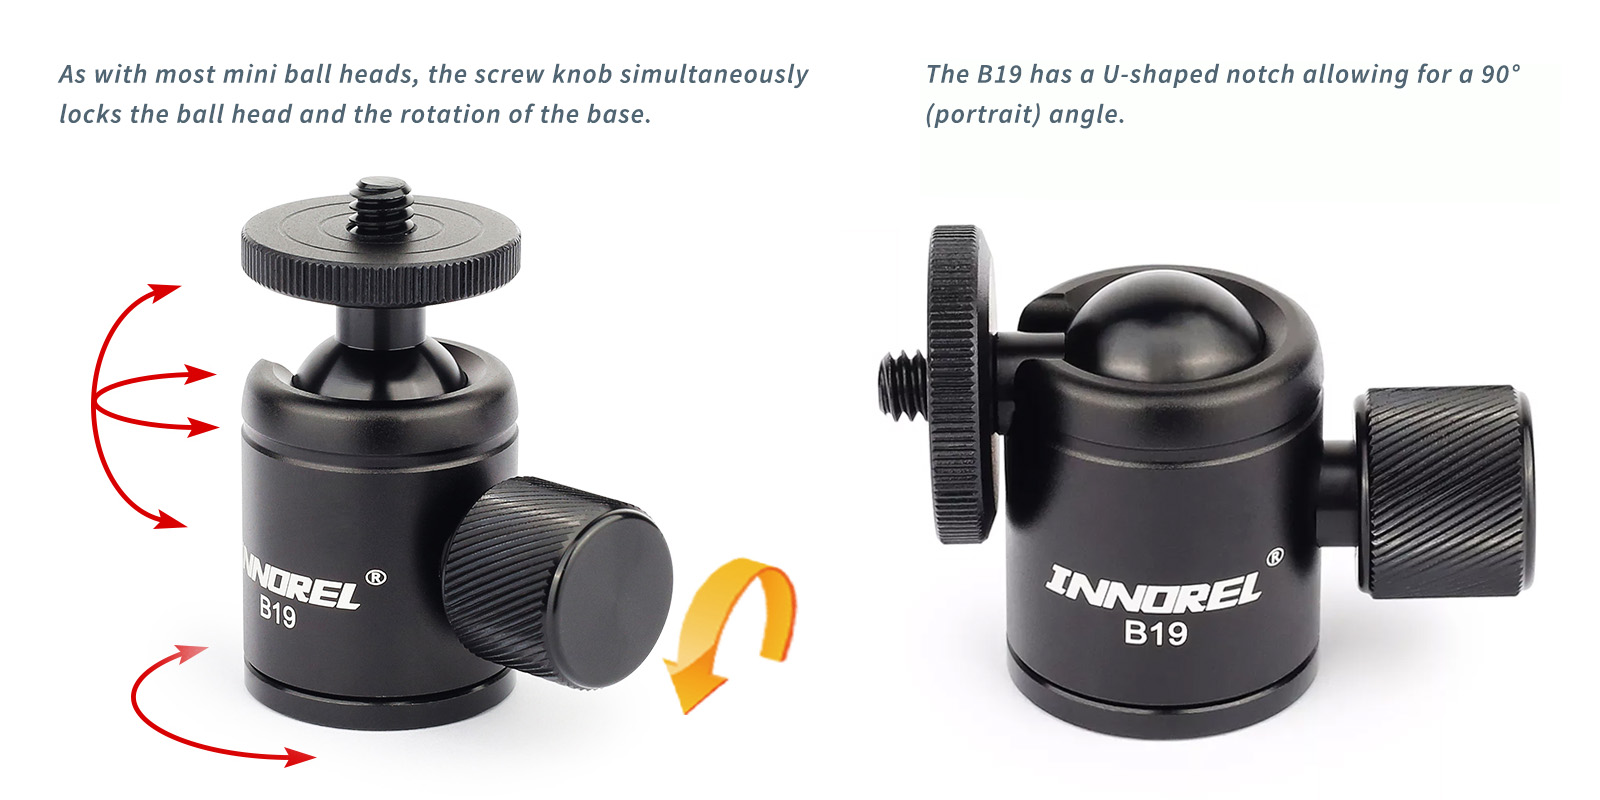 The Innorel B19 offers a standard dual locking panning base and ball head